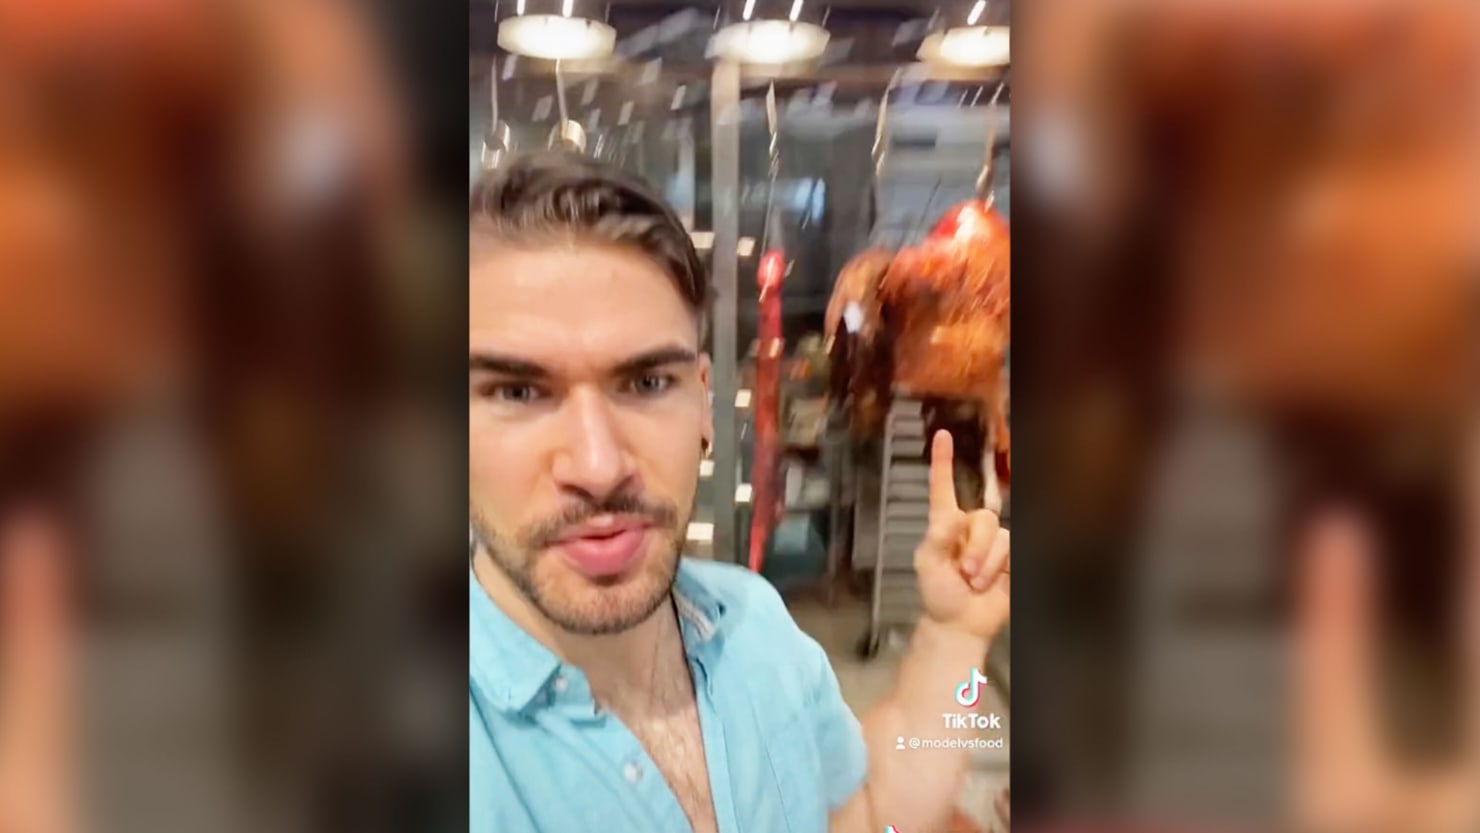 TikToker Sorry for ‘Shock’ Video Comparing Asian Market to ‘Pet Store’